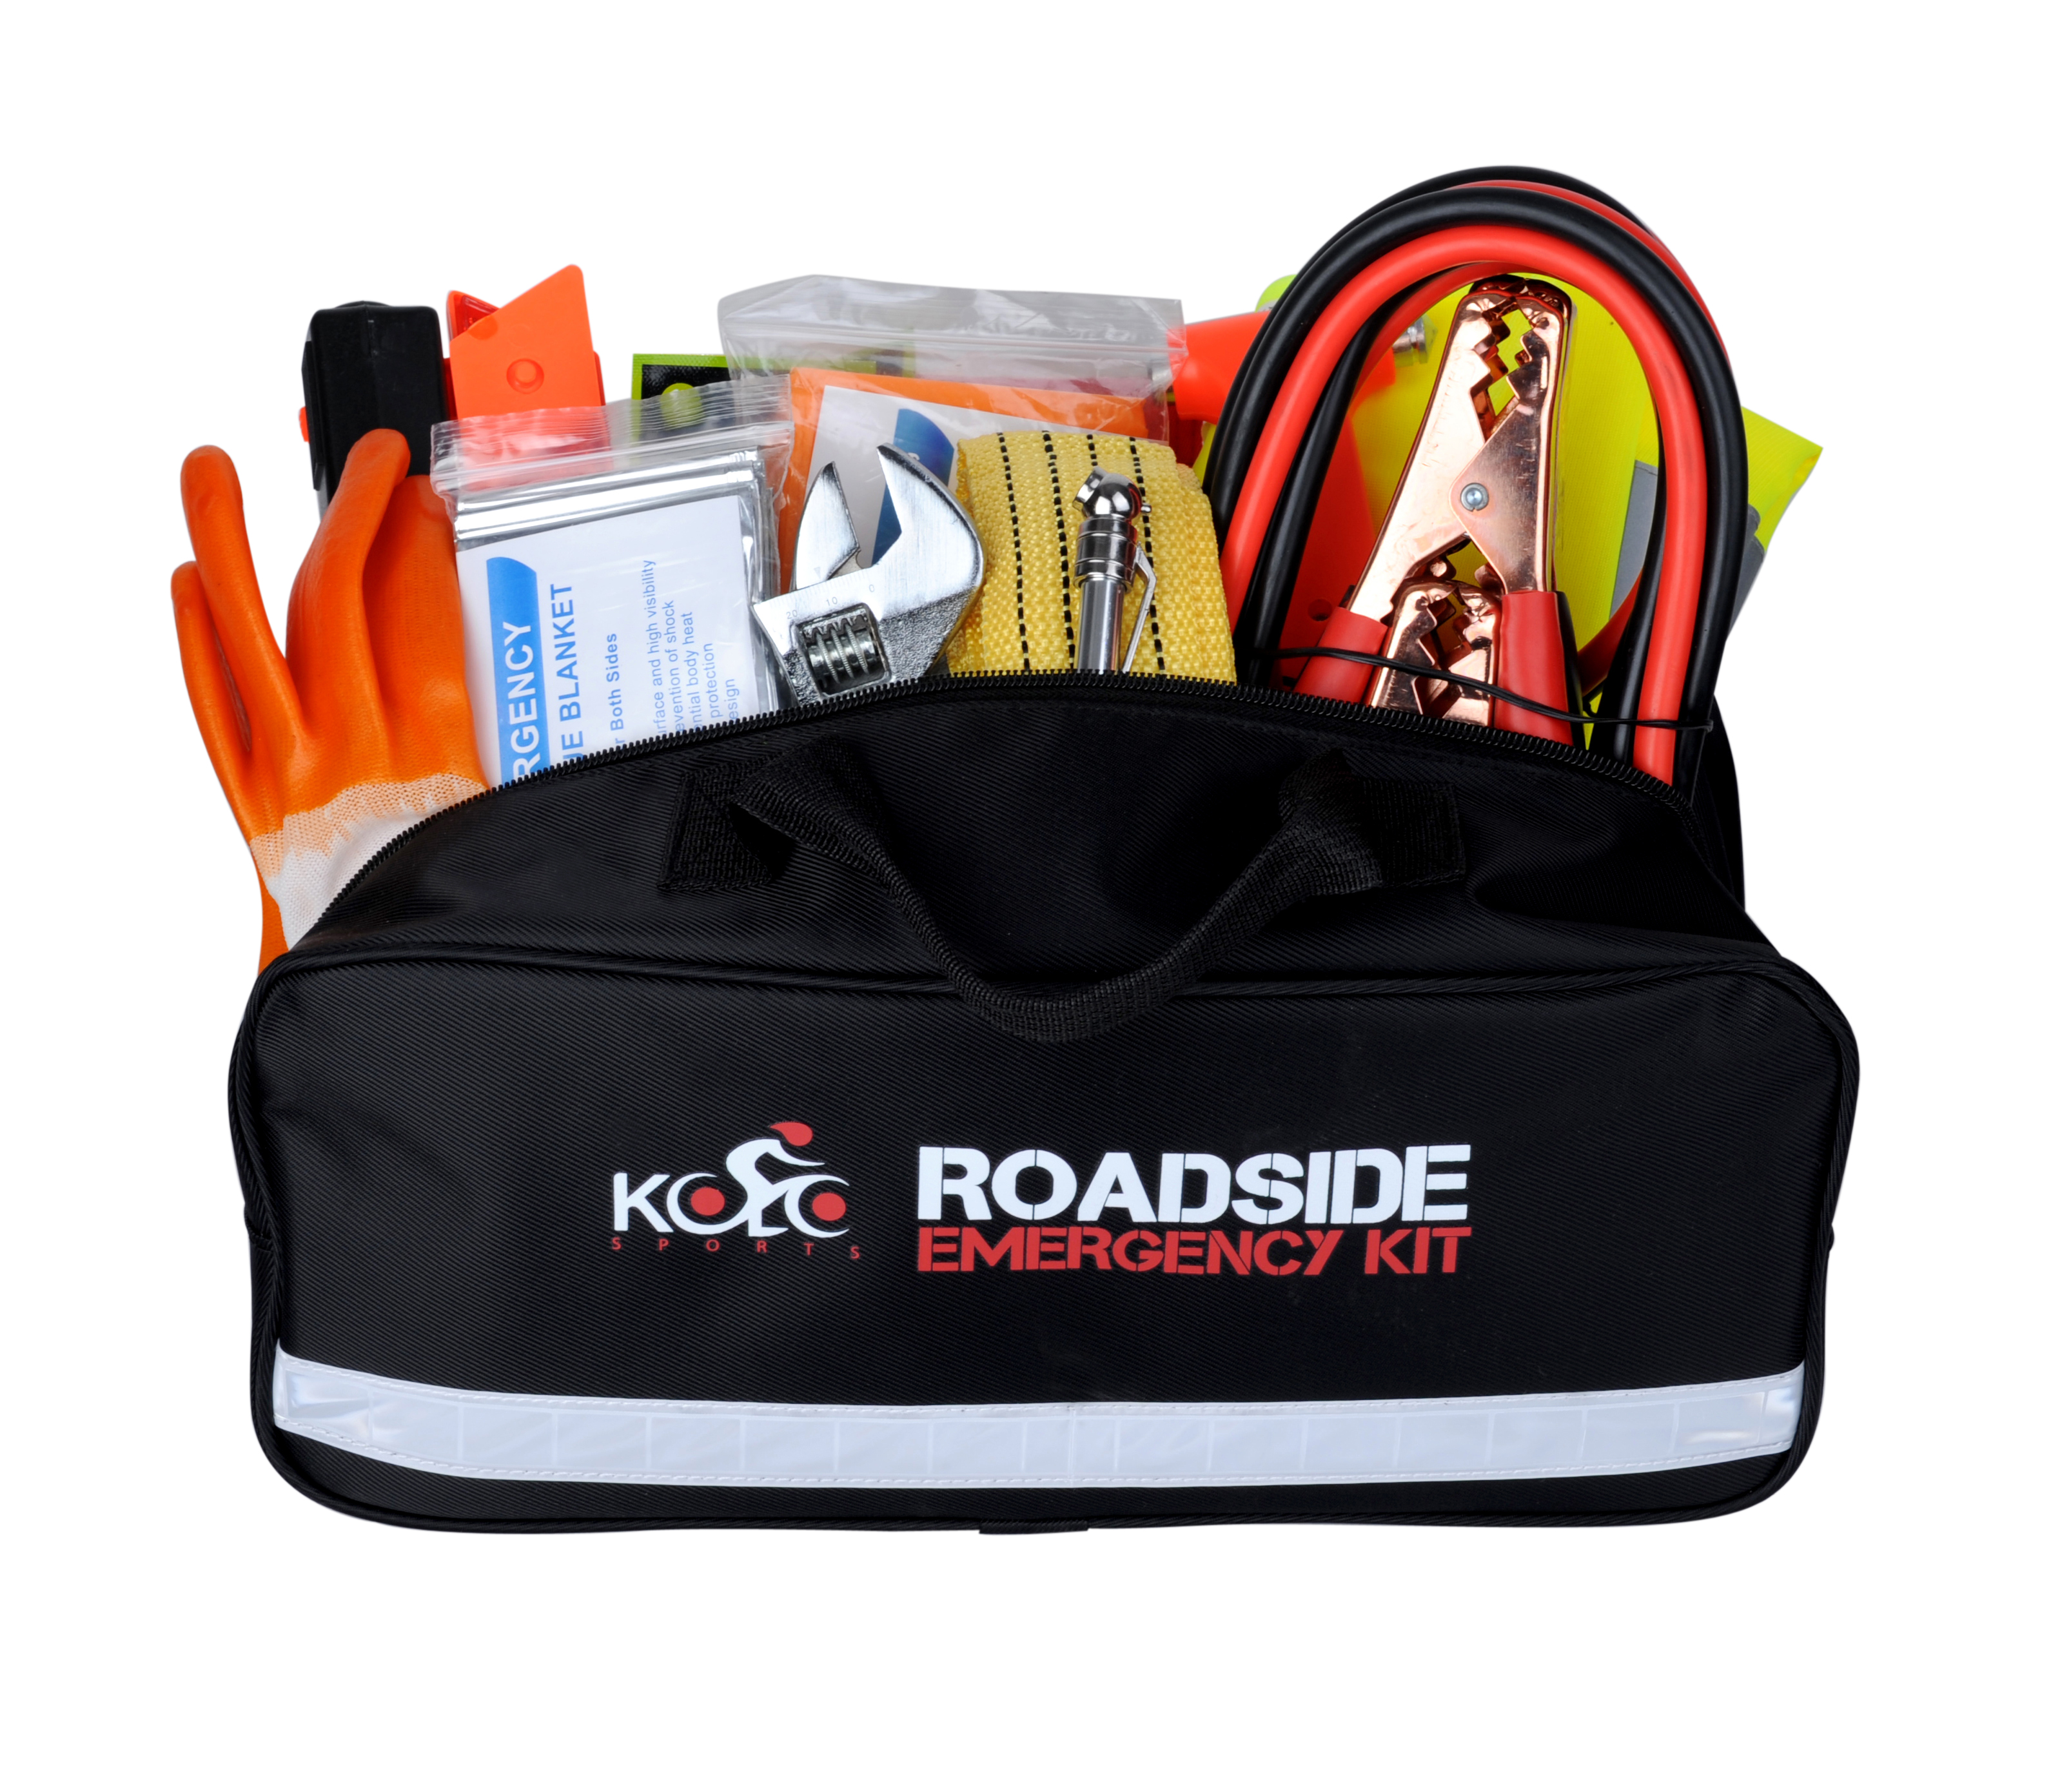 Kolo Sports Roadside Emergency Kit 156-Piece Multipurpose Emergency Pack Great for Automotive Roadside Assistance & First Aid Set The Ultimate All-in-One Solution